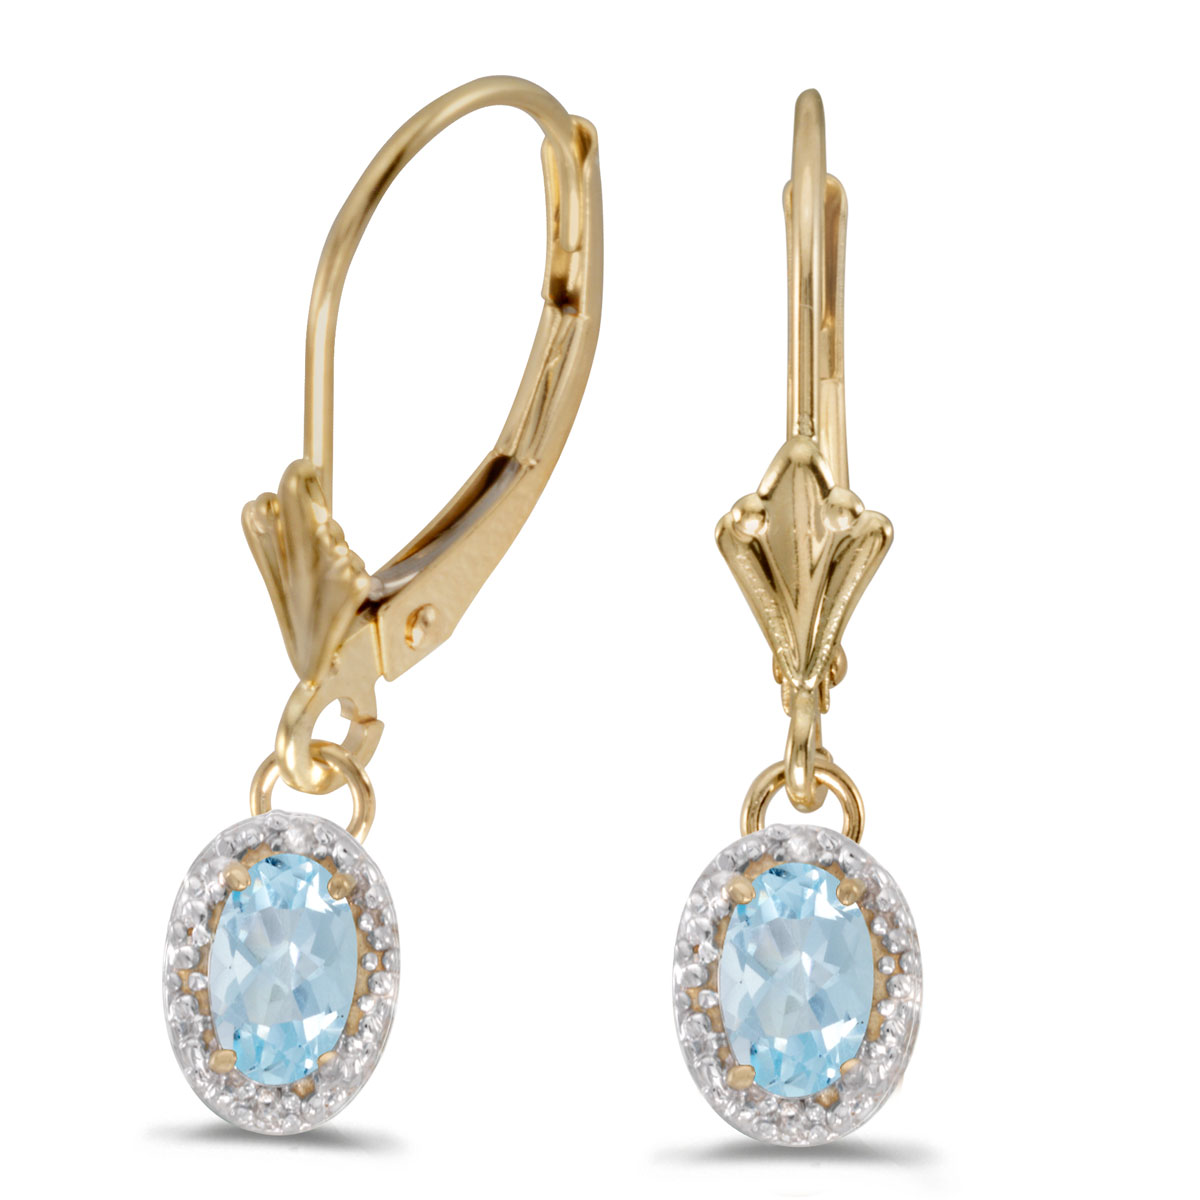 Beautiful 10k yellow gold leverback earrings with stunning 6x4 mm aquamarines complemented with bright diamonds.